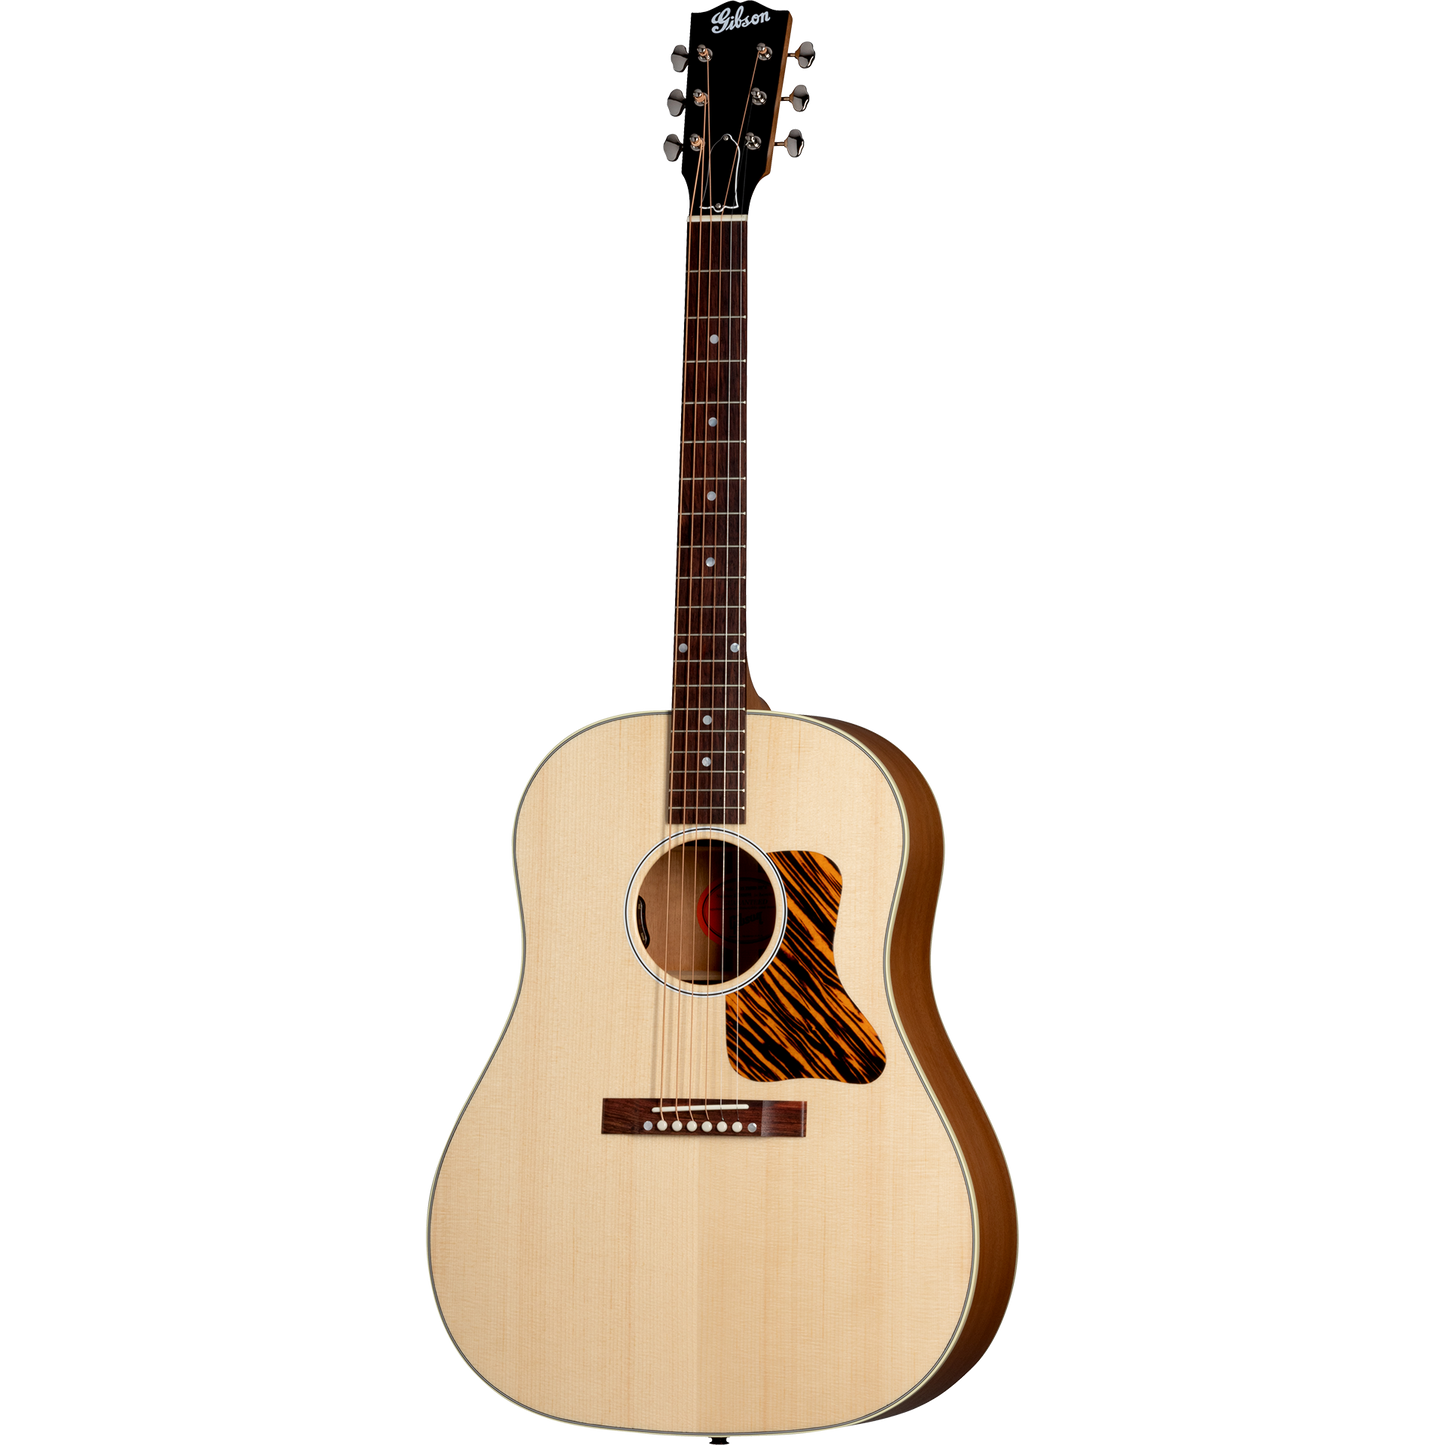 Gibson J-35 Faded 30’s Acoustic Guitar - Antique Natural